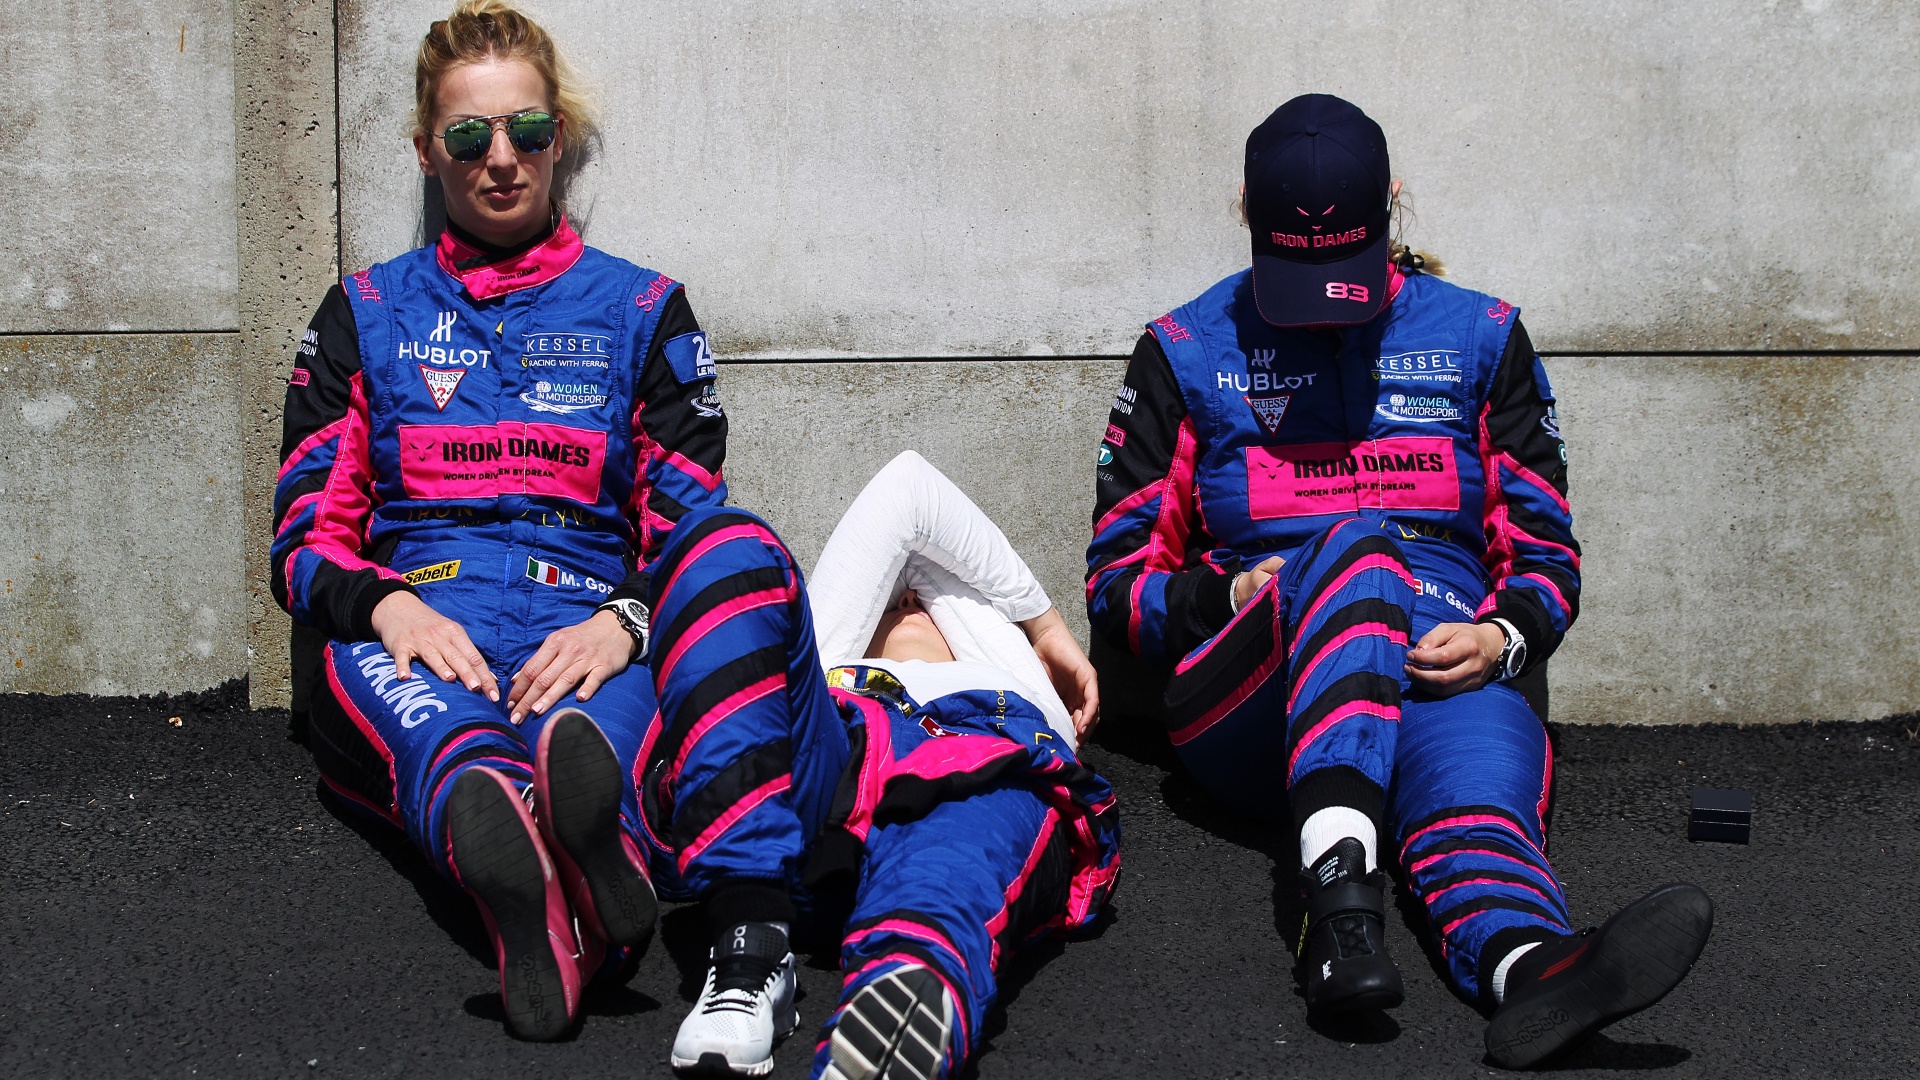 Manuela Gostner, Rahel Frey and Michelle Gatting of the Kessel Racing Ferrari 488 GTE team relax before the 2019 Le Mans race. Photo: Ker Robertson/Getty